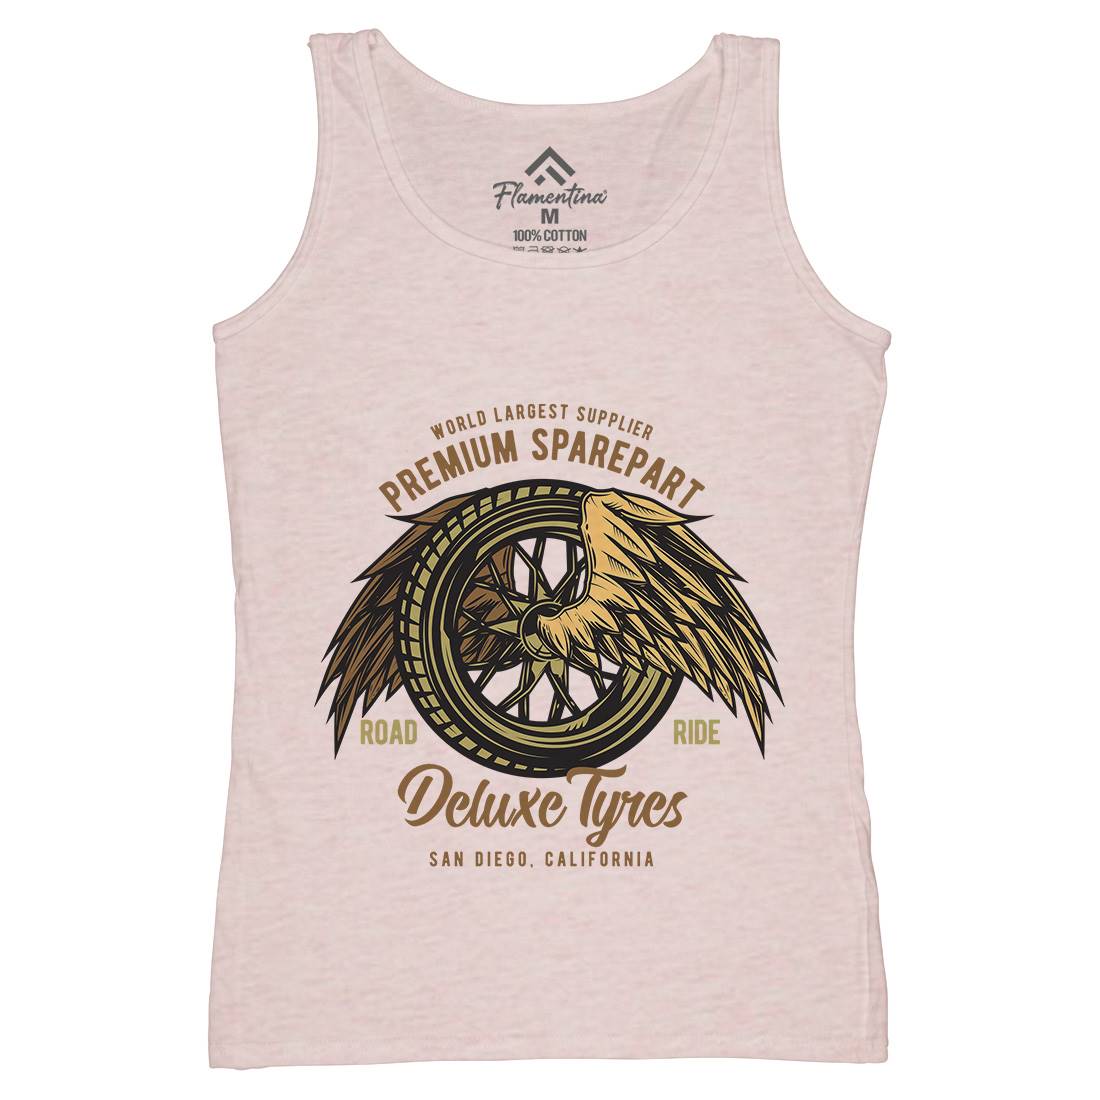 Deluxe Tyres Muscle Car Womens Organic Tank Top Vest Cars B866